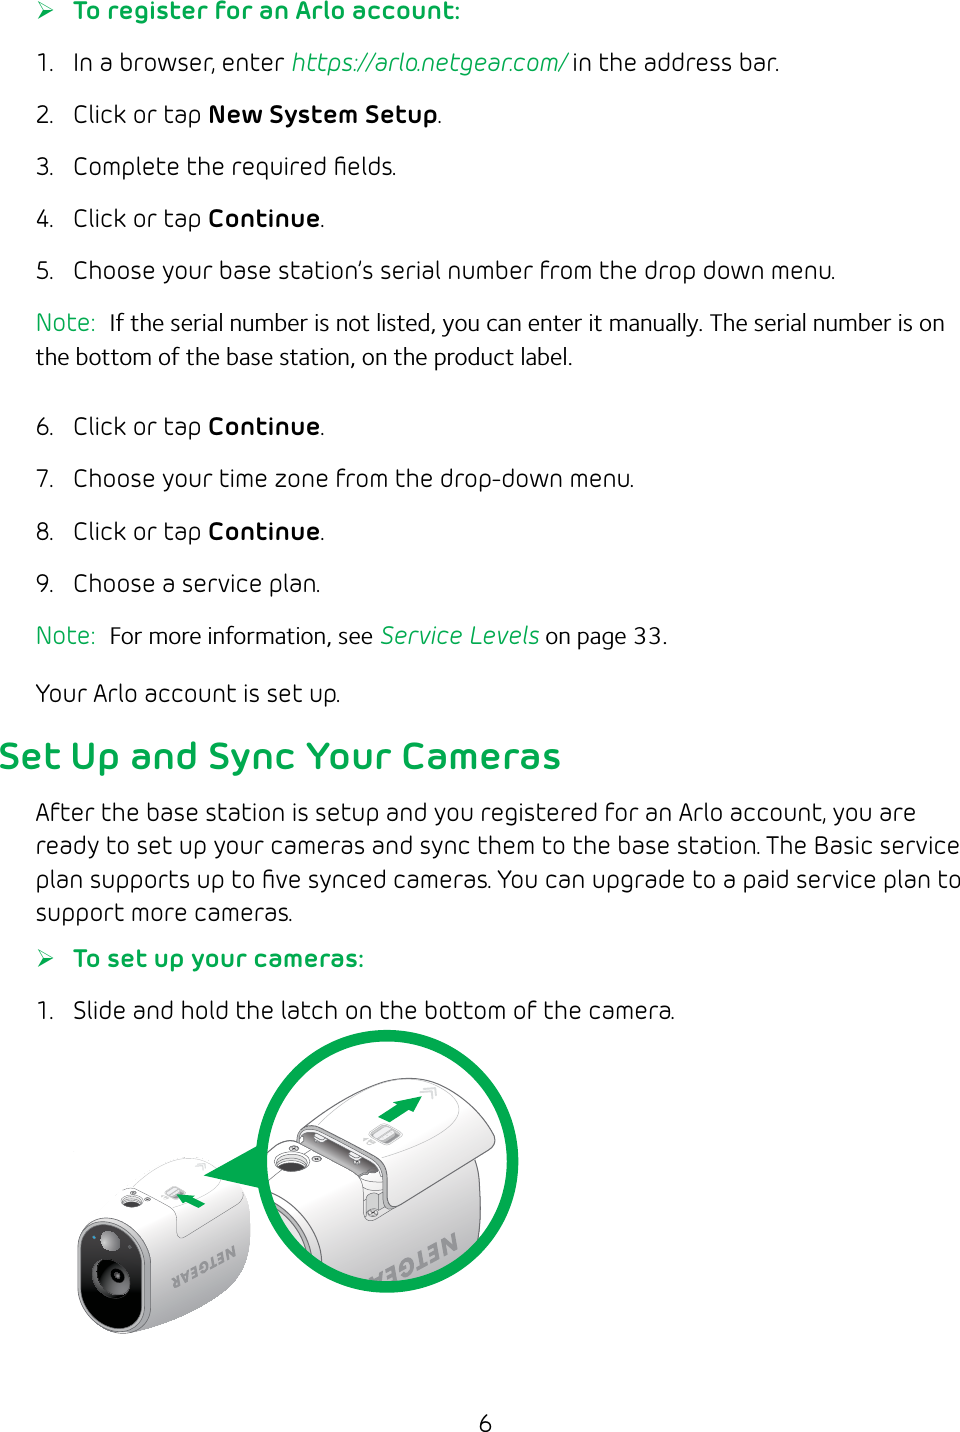 6 ¾To register for an Arlo account:1.  In a browser, enter https://arlo.netgear.com/ in the address bar.2.  Click or tap New System Setup.3.  Complete the required ﬁelds.4.  Click or tap Continue.5.  Choose your base station’s serial number from the drop down menu.Note:  If the serial number is not listed, you can enter it manually. The serial number is on the bottom of the base station, on the product label.6.  Click or tap Continue.7.  Choose your time zone from the drop‑down menu.8.  Click or tap Continue.9.  Choose a service plan.Note:  For more information, see Service Levels on page 33.Your Arlo account is set up.Set Up and Sync Your CamerasAfter the base station is setup and you registered for an Arlo account, you are ready to set up your cameras and sync them to the base station. The Basic service plan supports up to ﬁve synced cameras. You can upgrade to a paid service plan to support more cameras. ¾To set up your cameras:1.  Slide and hold the latch on the bottom of the camera.